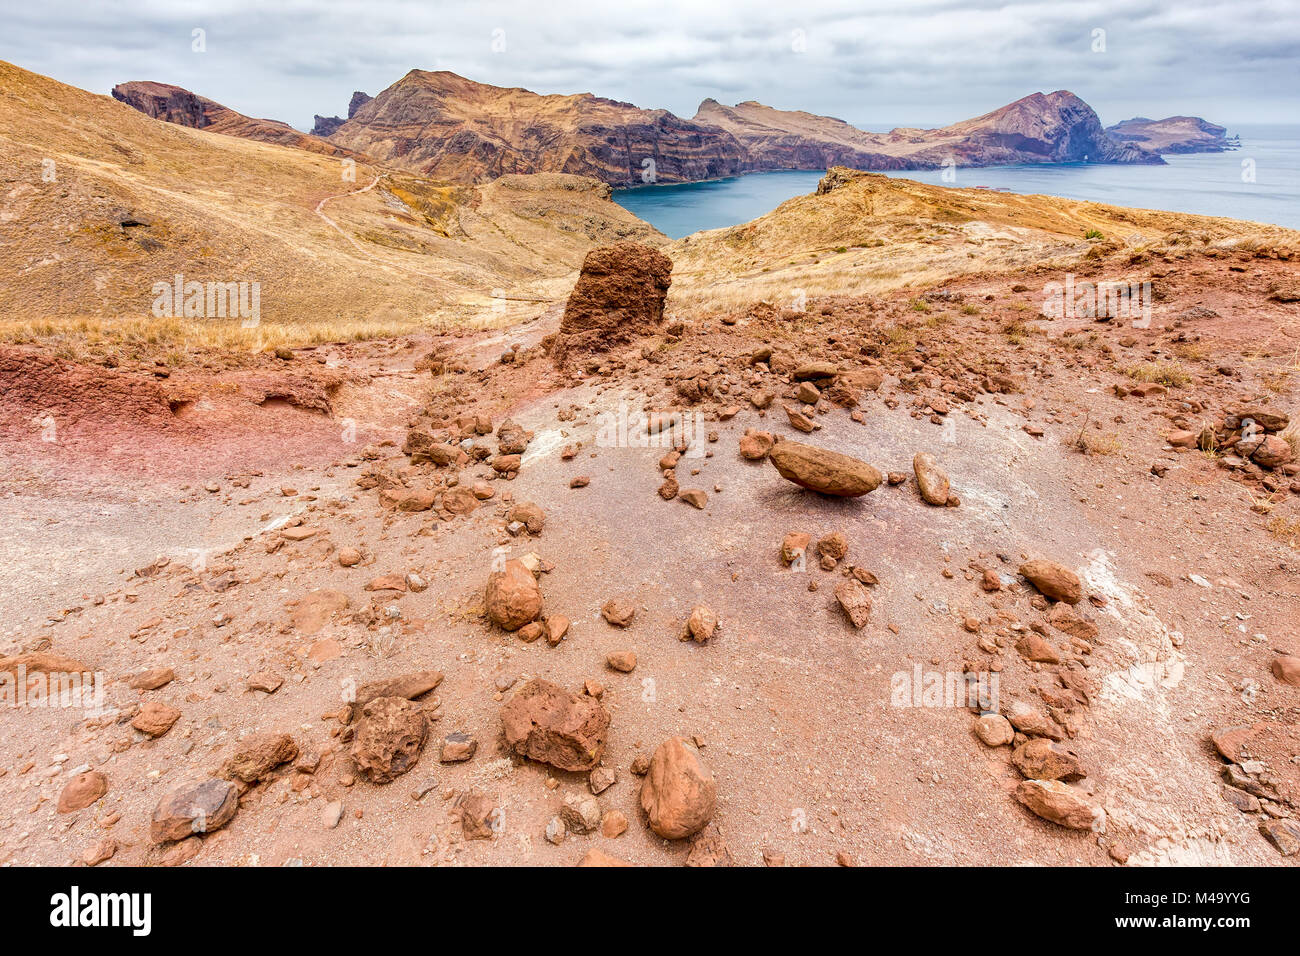 Moonscape lunar landscape with rocks on island Madeira Stock Photo